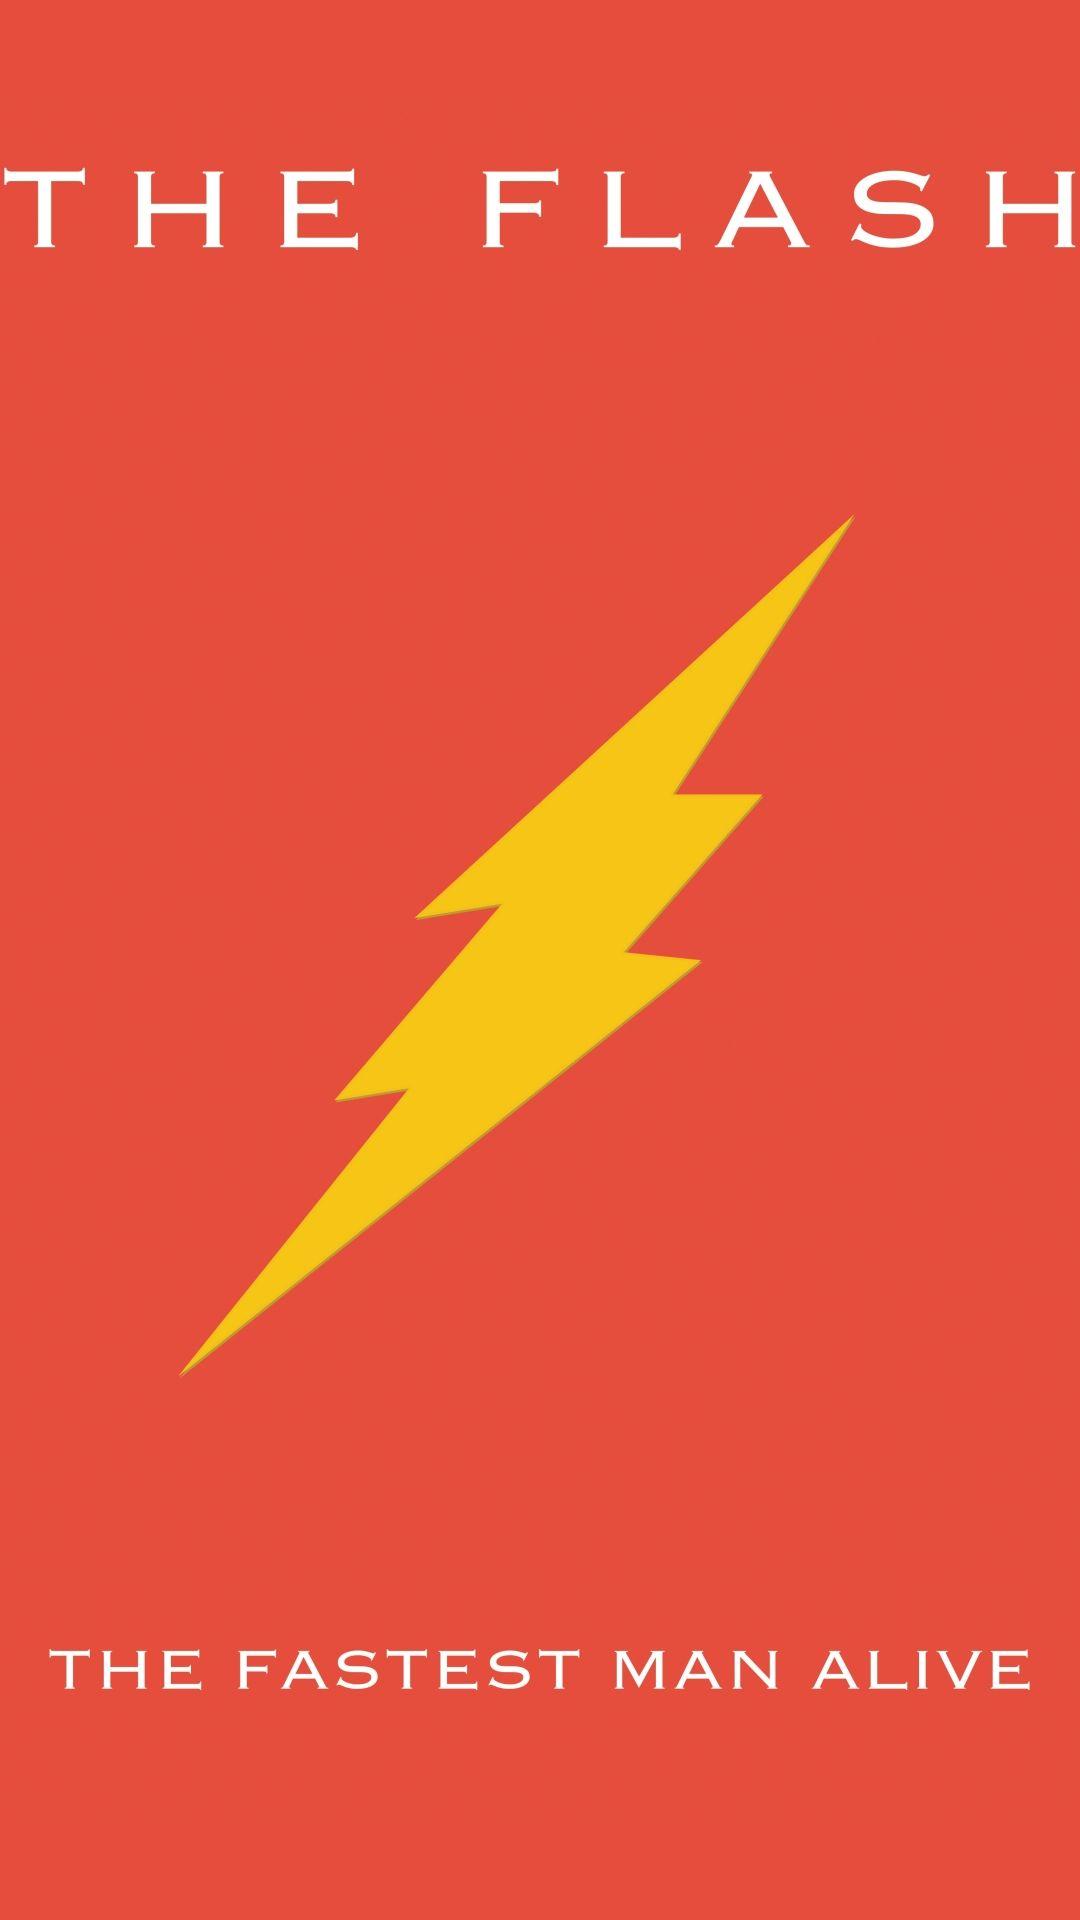 The Flash iPhone Wallpapers - Top Free The Flash iPhone Backgrounds ...